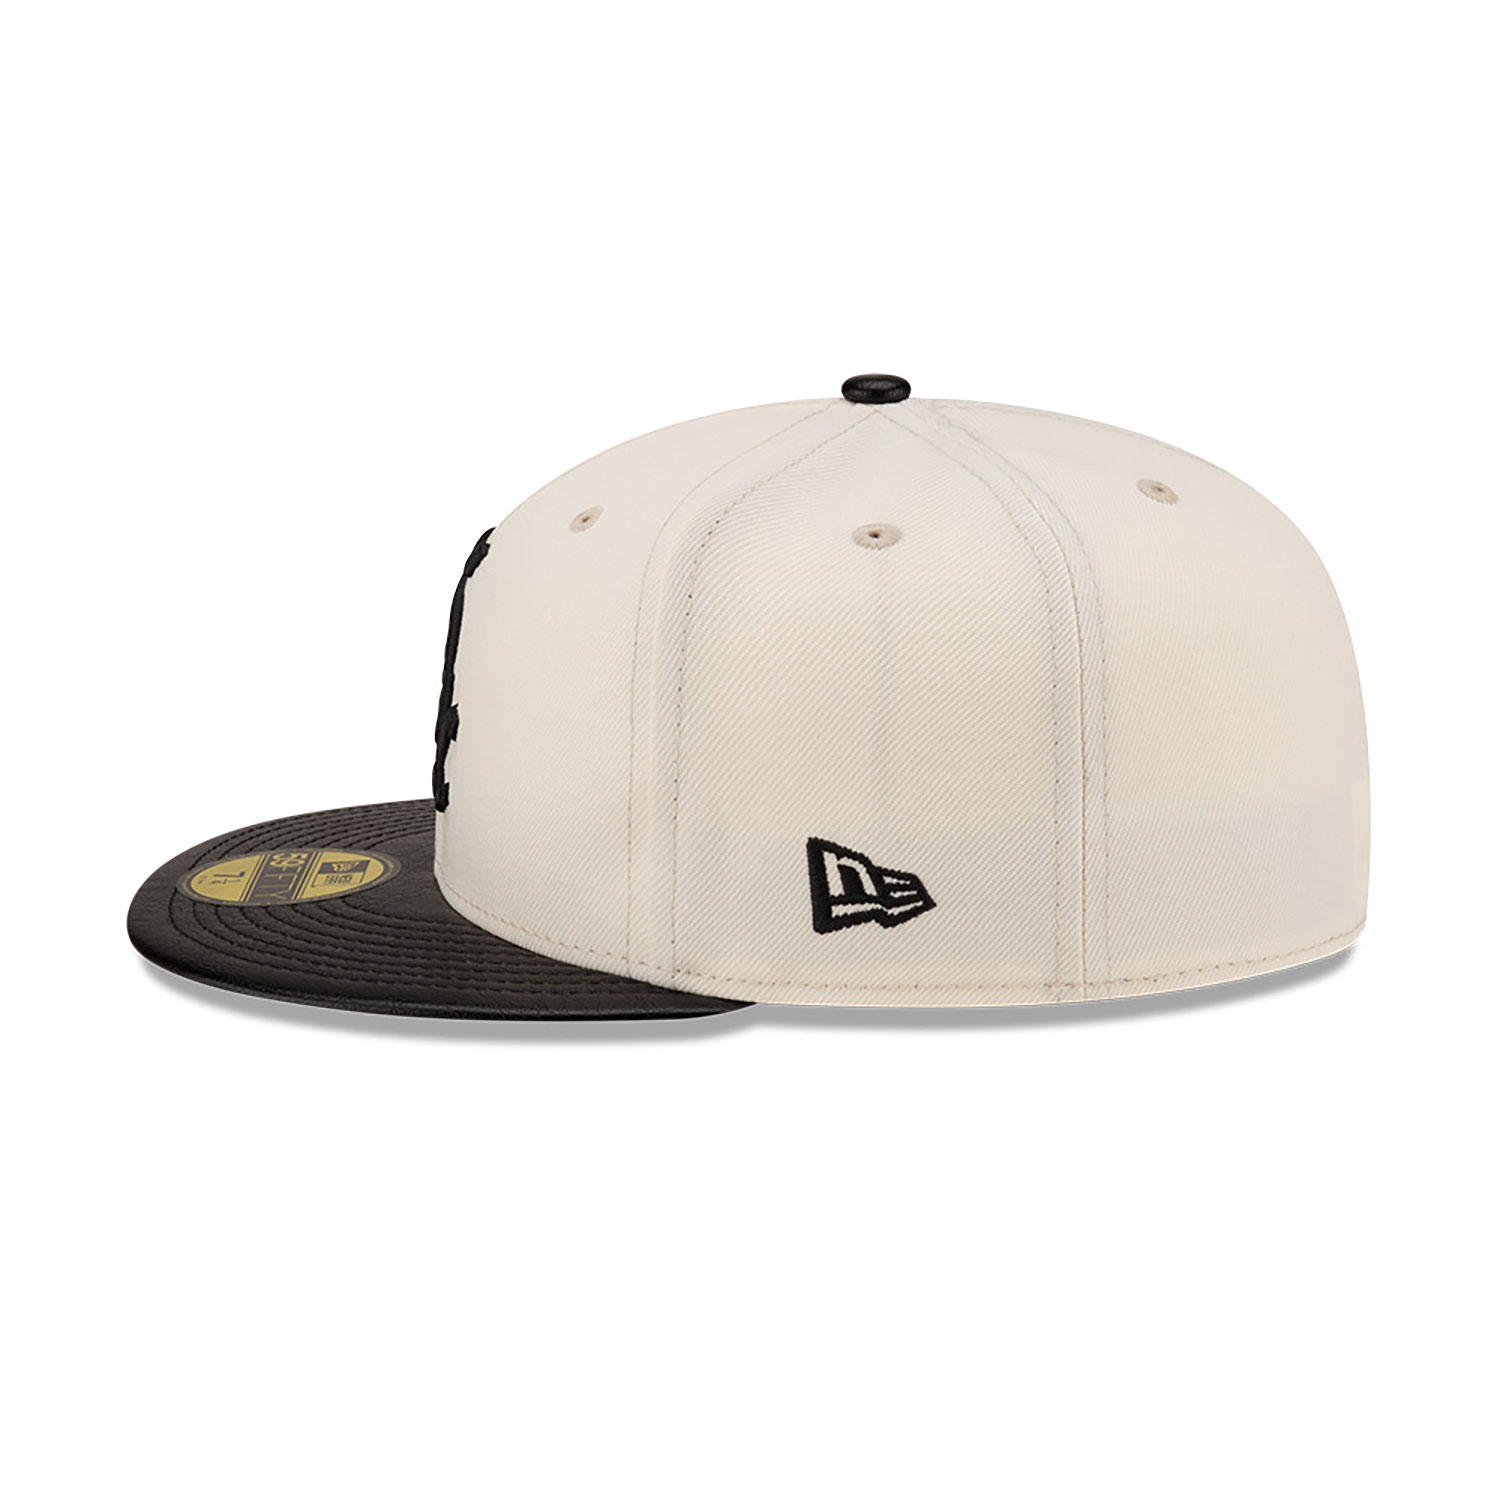 Chicago White Sox Leather Visor Chrome White 59FIFTY Fitted Cap